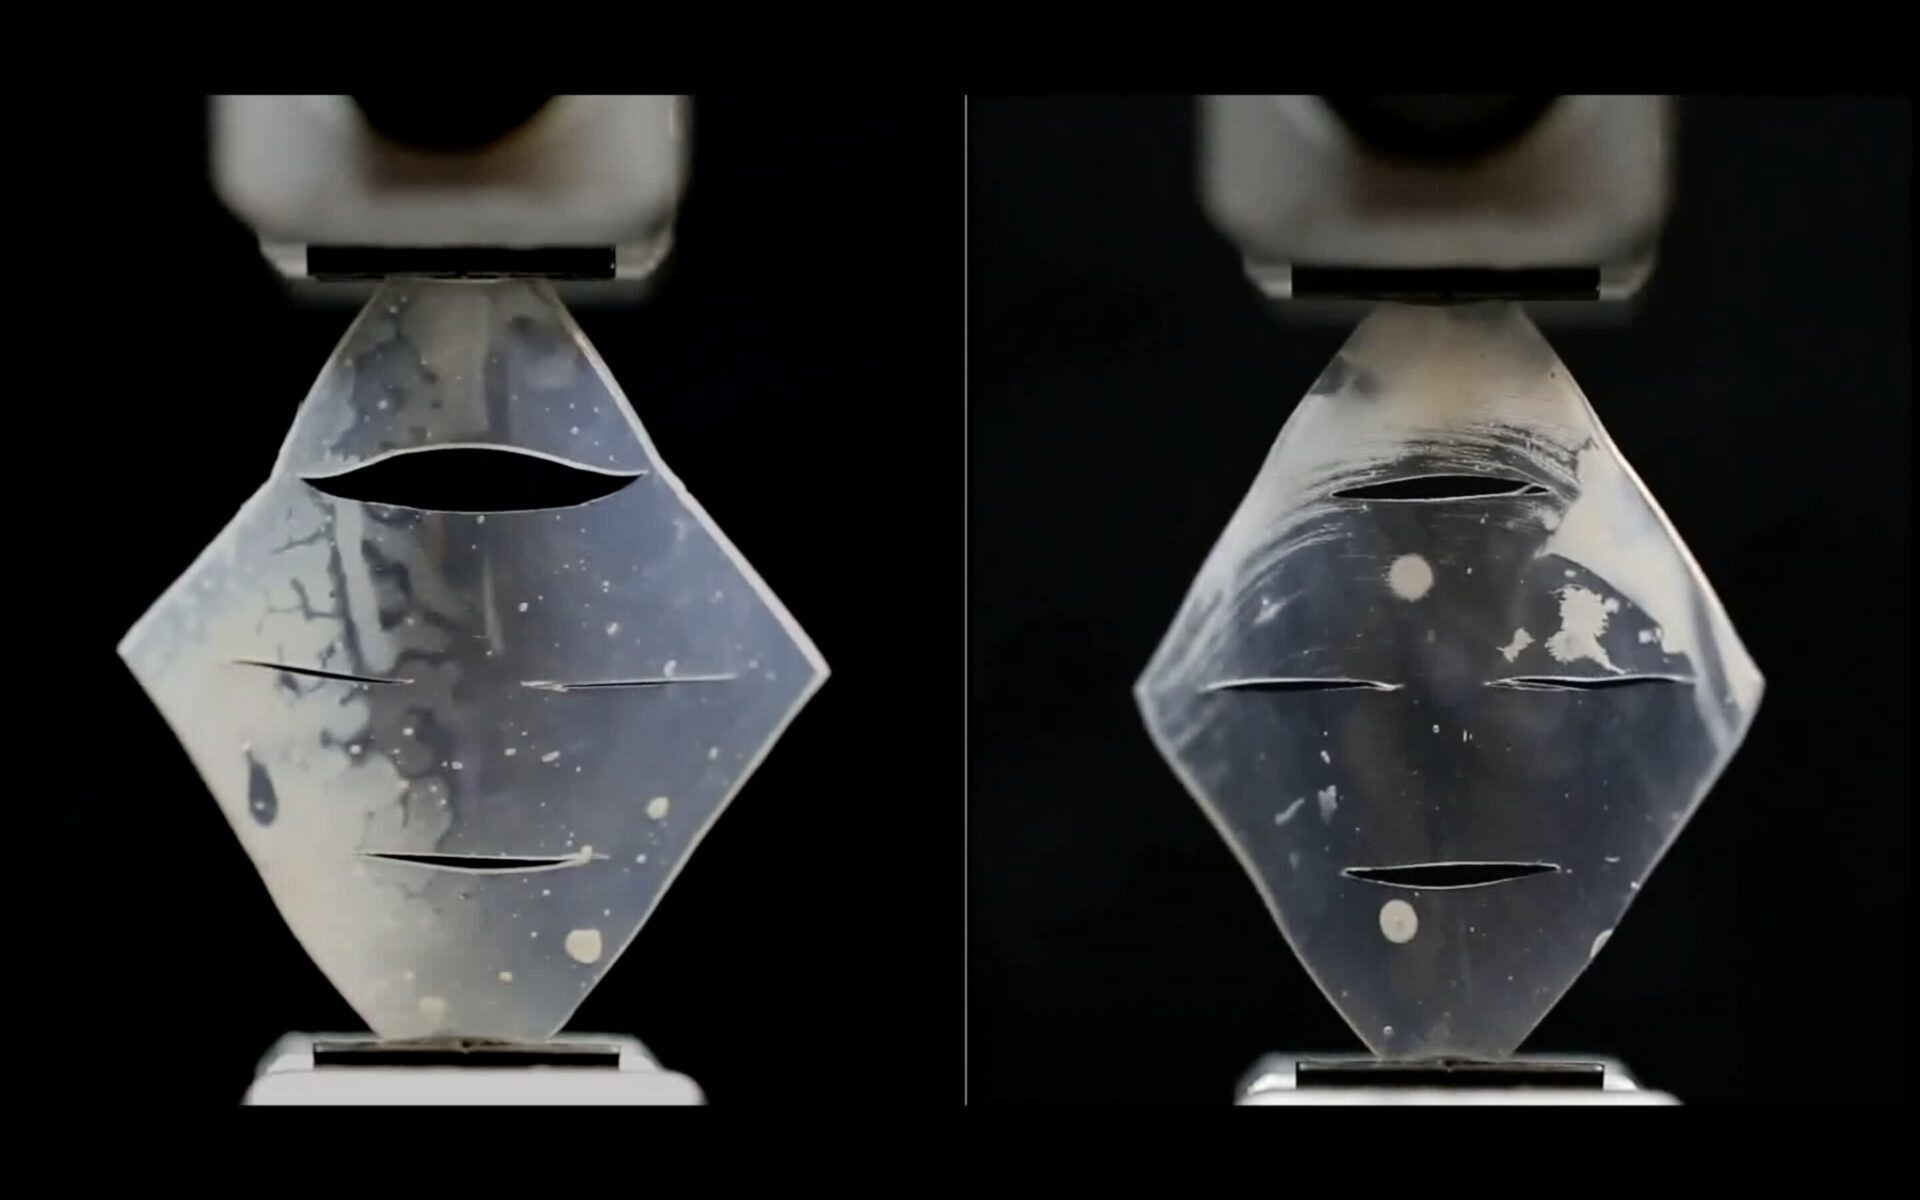 SEAS researchers have developed a multiscale approach that allows particle-reinforced rubber to bear high loads and resist crack growth over repeated use. Above, cracks grow in the left sample while the cracks in the right sample, made from the multiscale material, remain intact after 350,000 cycles. Credit: Suo Group/Harvard SEAS)